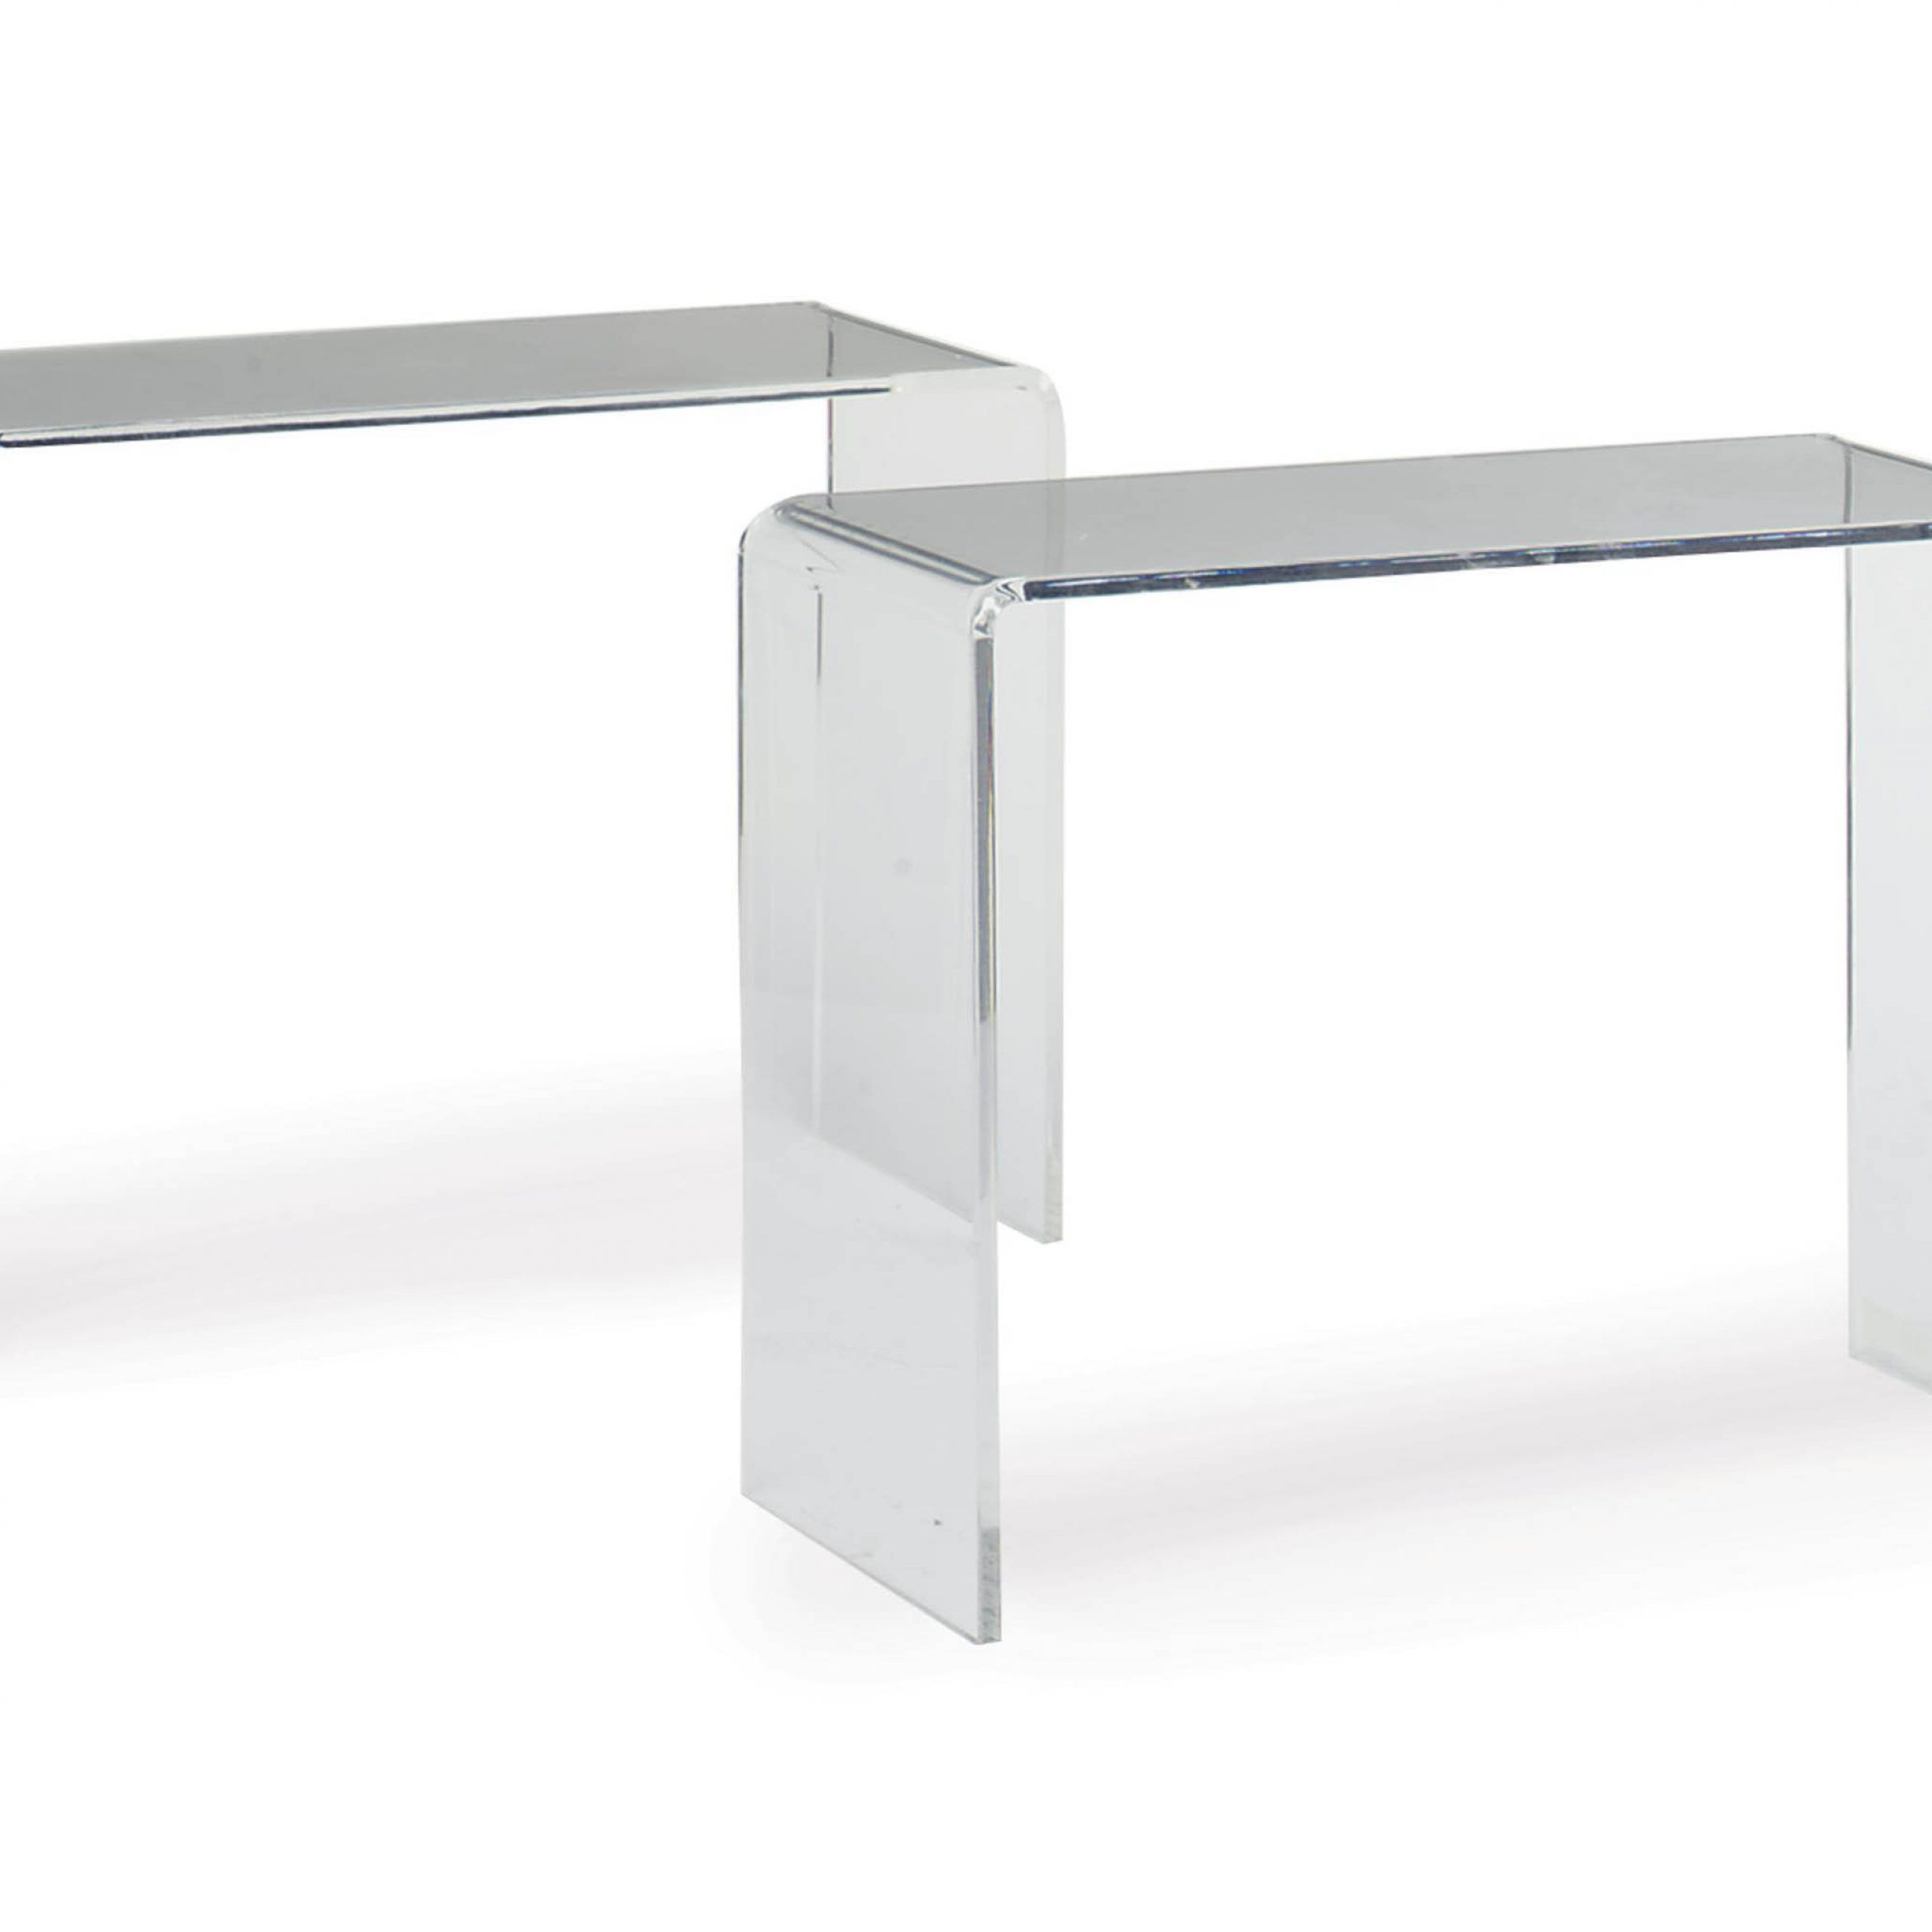 A Pair Of Clear Acrylic Console Tables, , Modern | Christie's Inside Acrylic Console Tables (View 13 of 20)